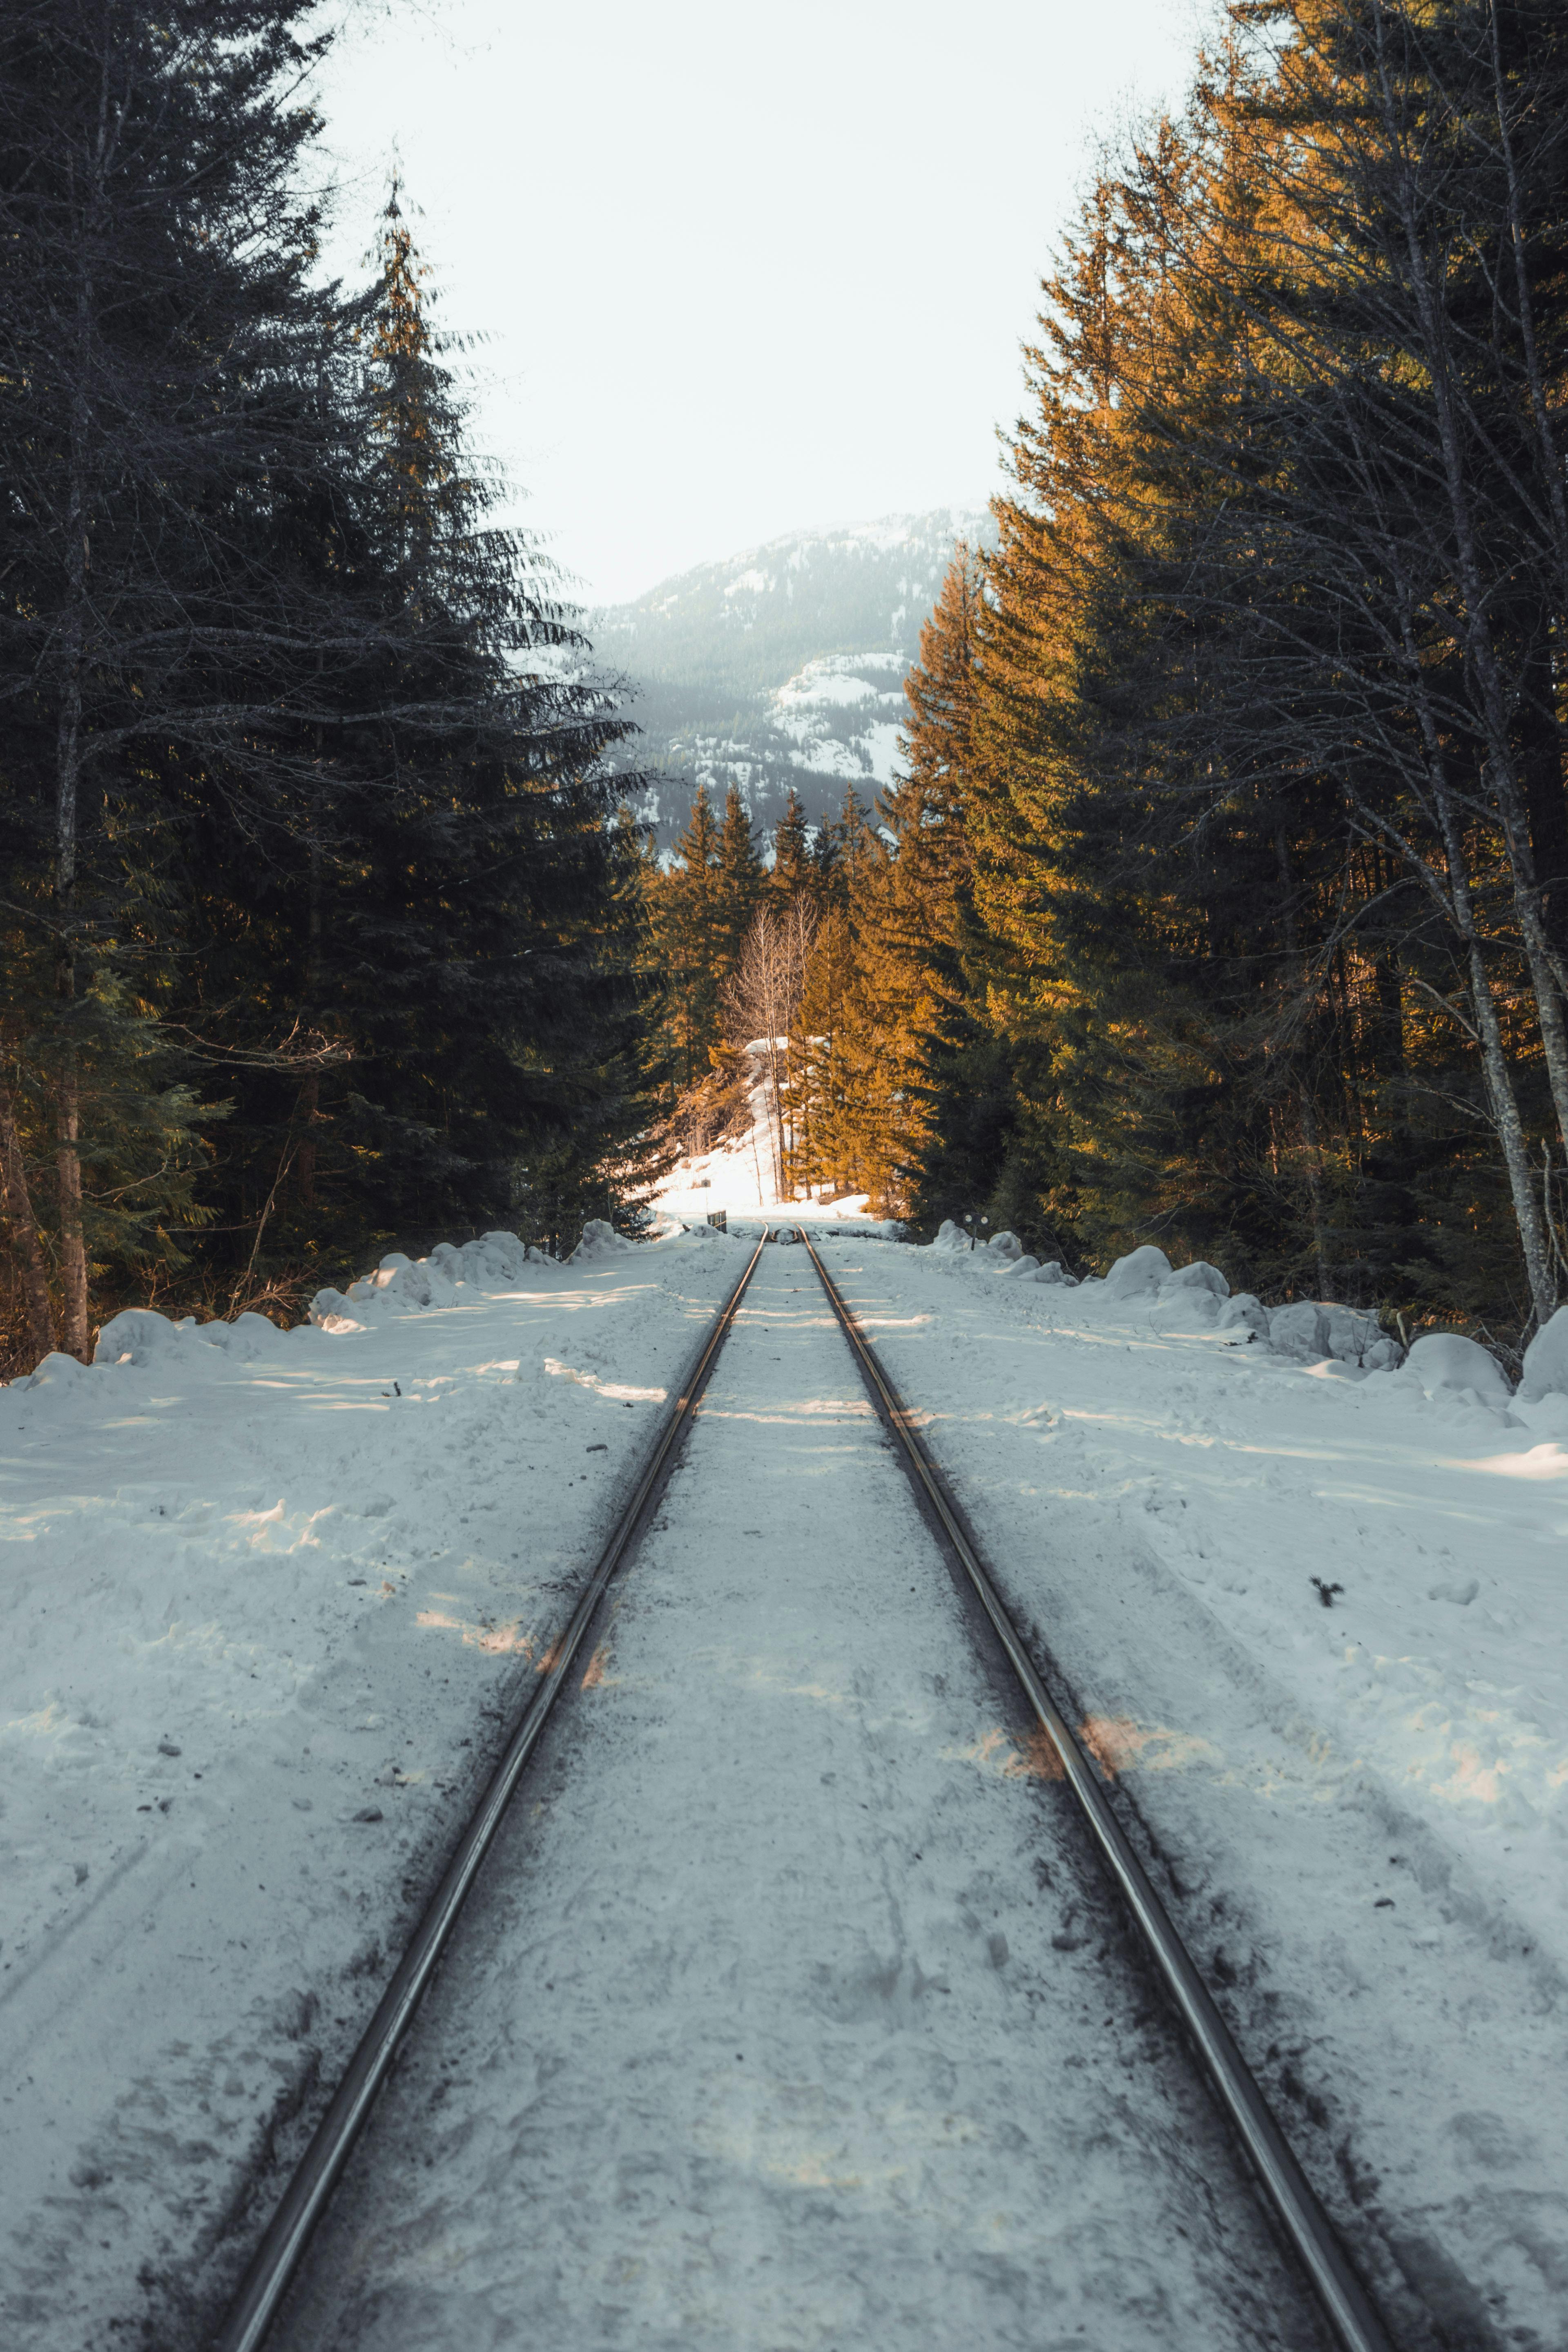 Shallow Focus Photography of Railway during Sunset · Free Stock Photo